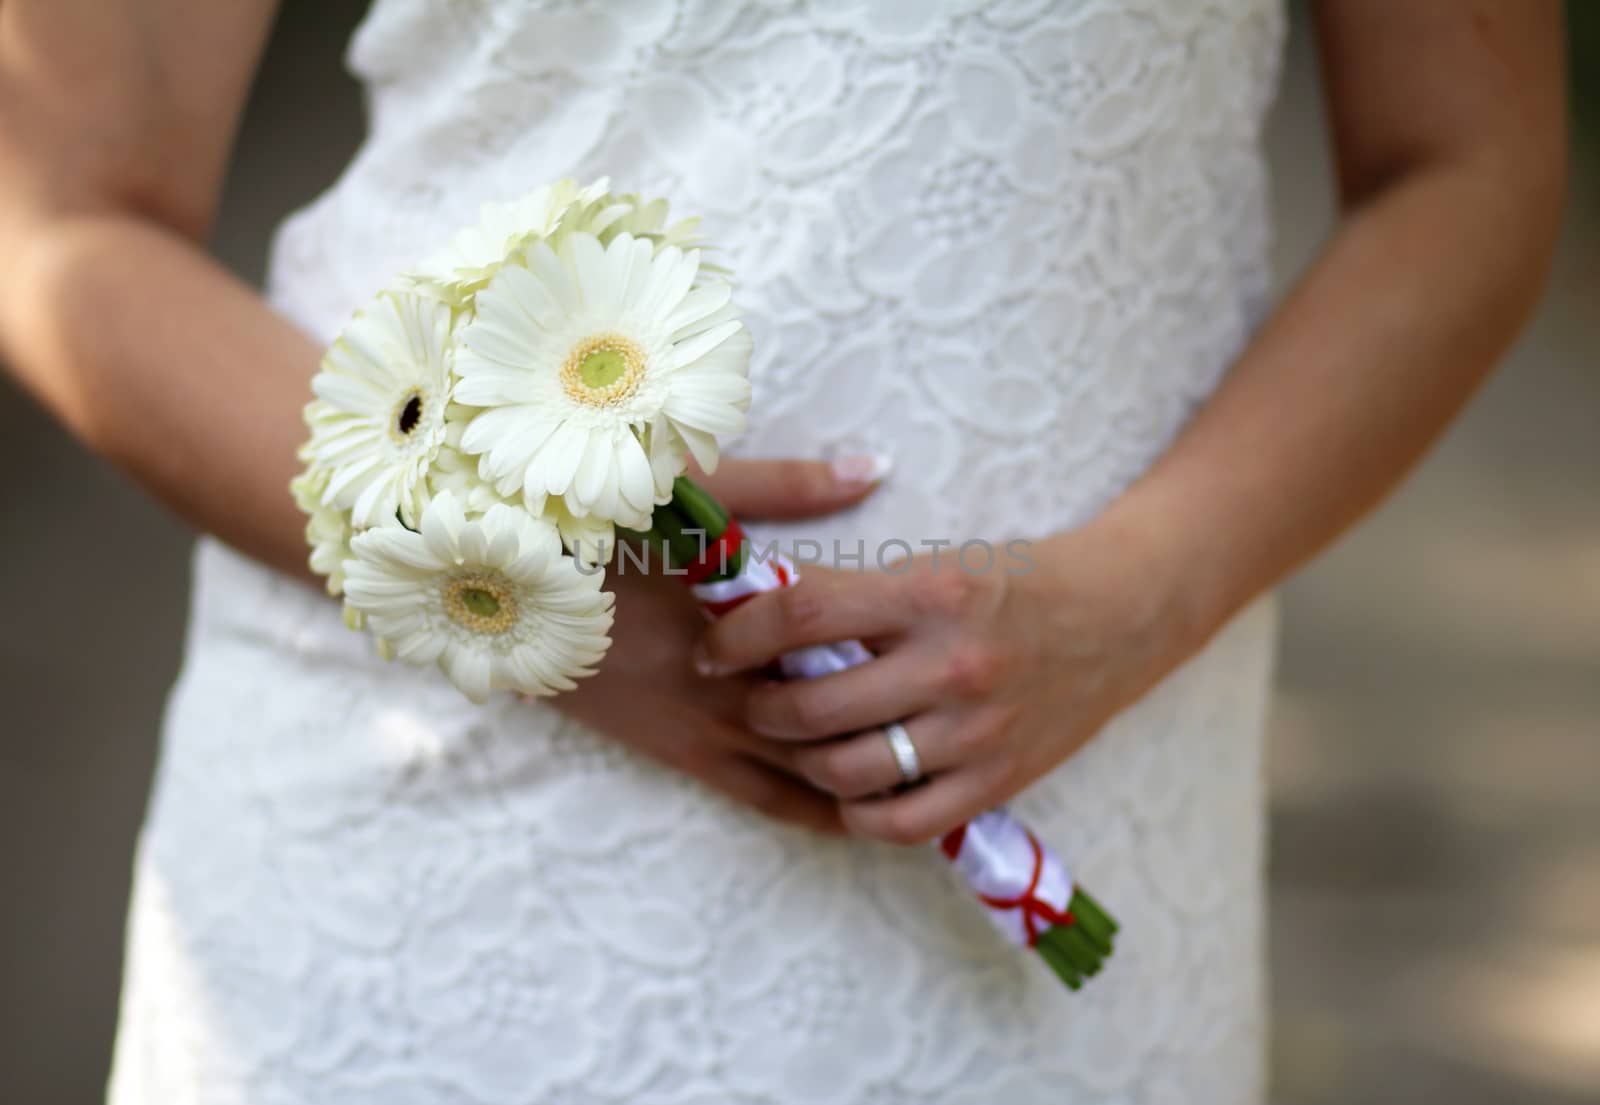 Wedding decorative bouquet of flowers with white opestkami in the hands of the bride